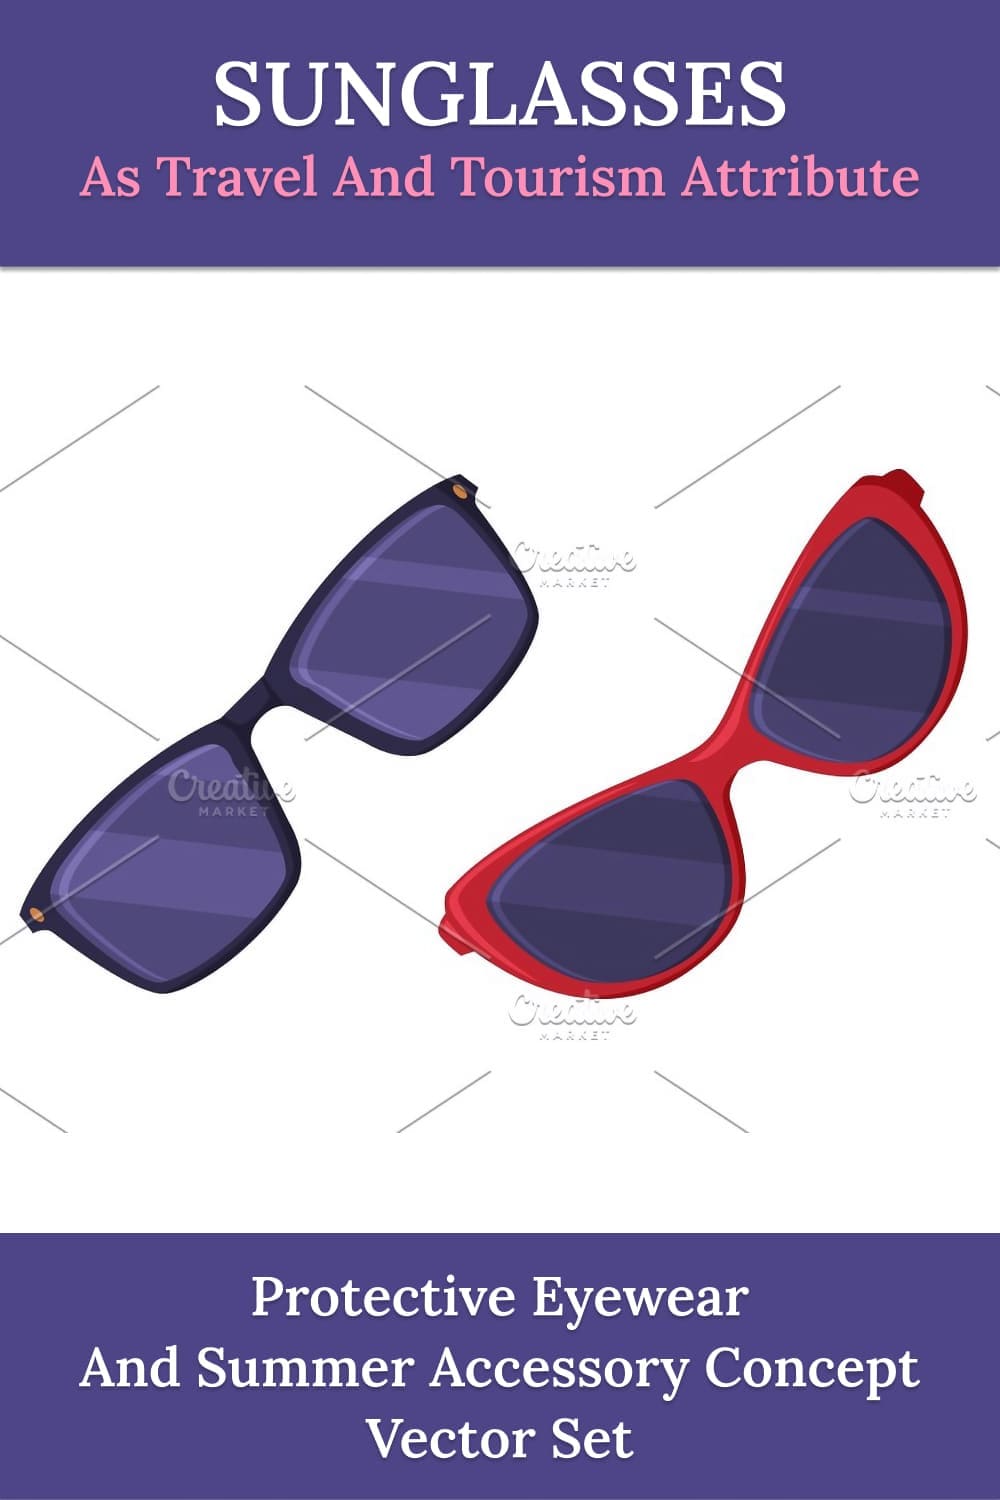 Sunglasses or shades as travel and tourism attribute vector set, picture for pinterest.